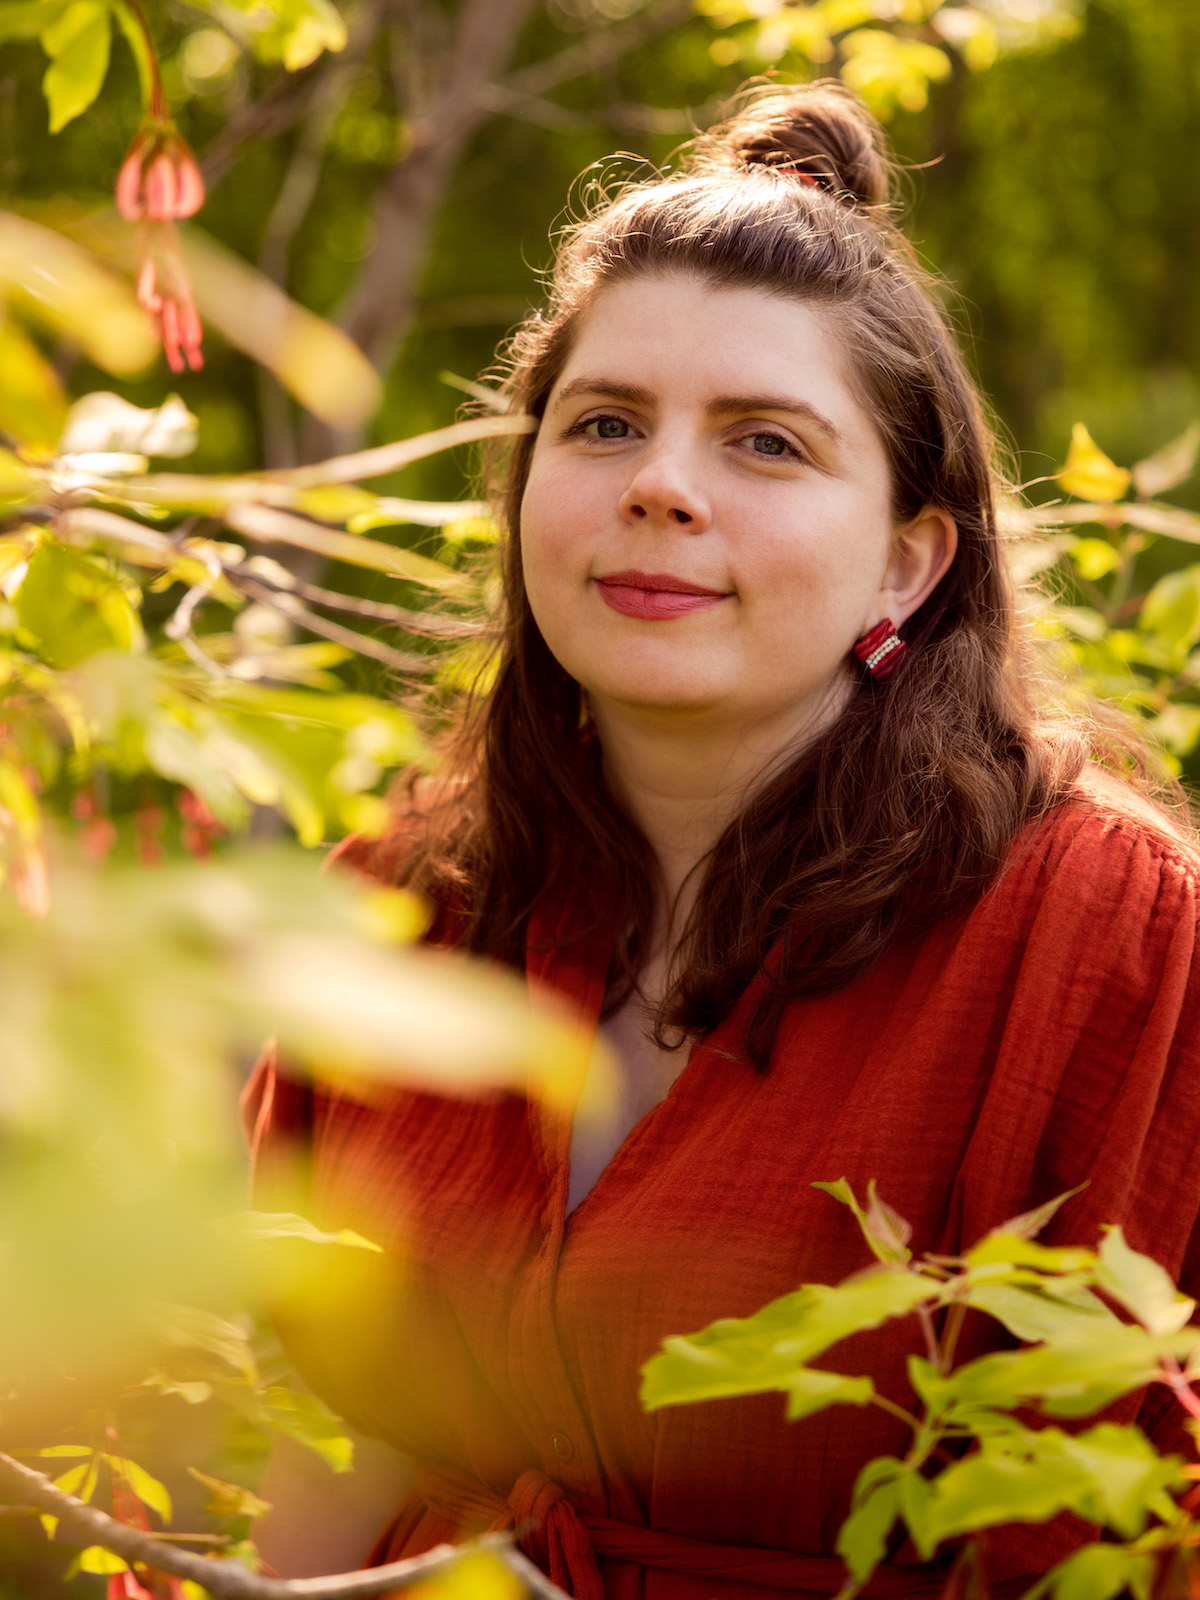 A photo of writer Jess Taylor. She is a light skin-toned woman with dark, medium length hair, half pulled into a topknot. She wears red lipstick and a red shirt, and stands among green foliage in golden hour.